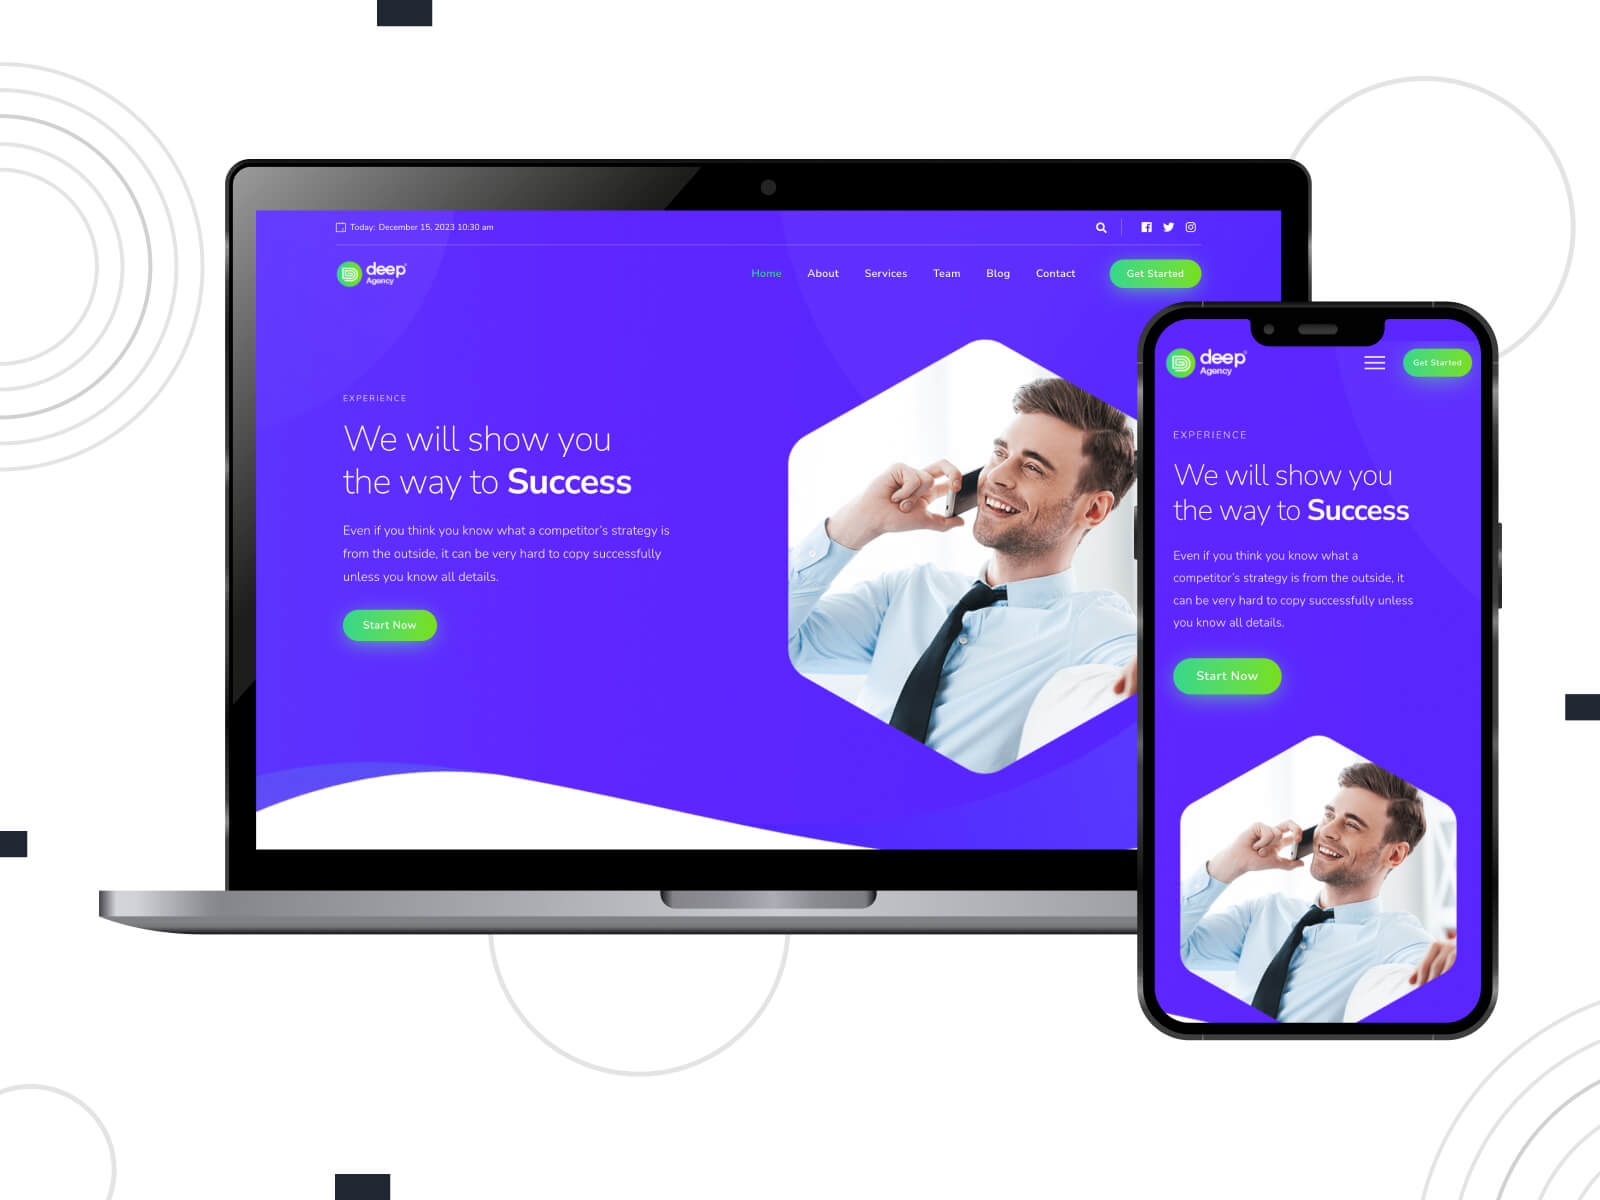 Picture of Deep - dim, calm, known as one of the top WordPress themes for modern-styled, stylish websites in dark sea green, light slate gray, and blue violet color scheme.